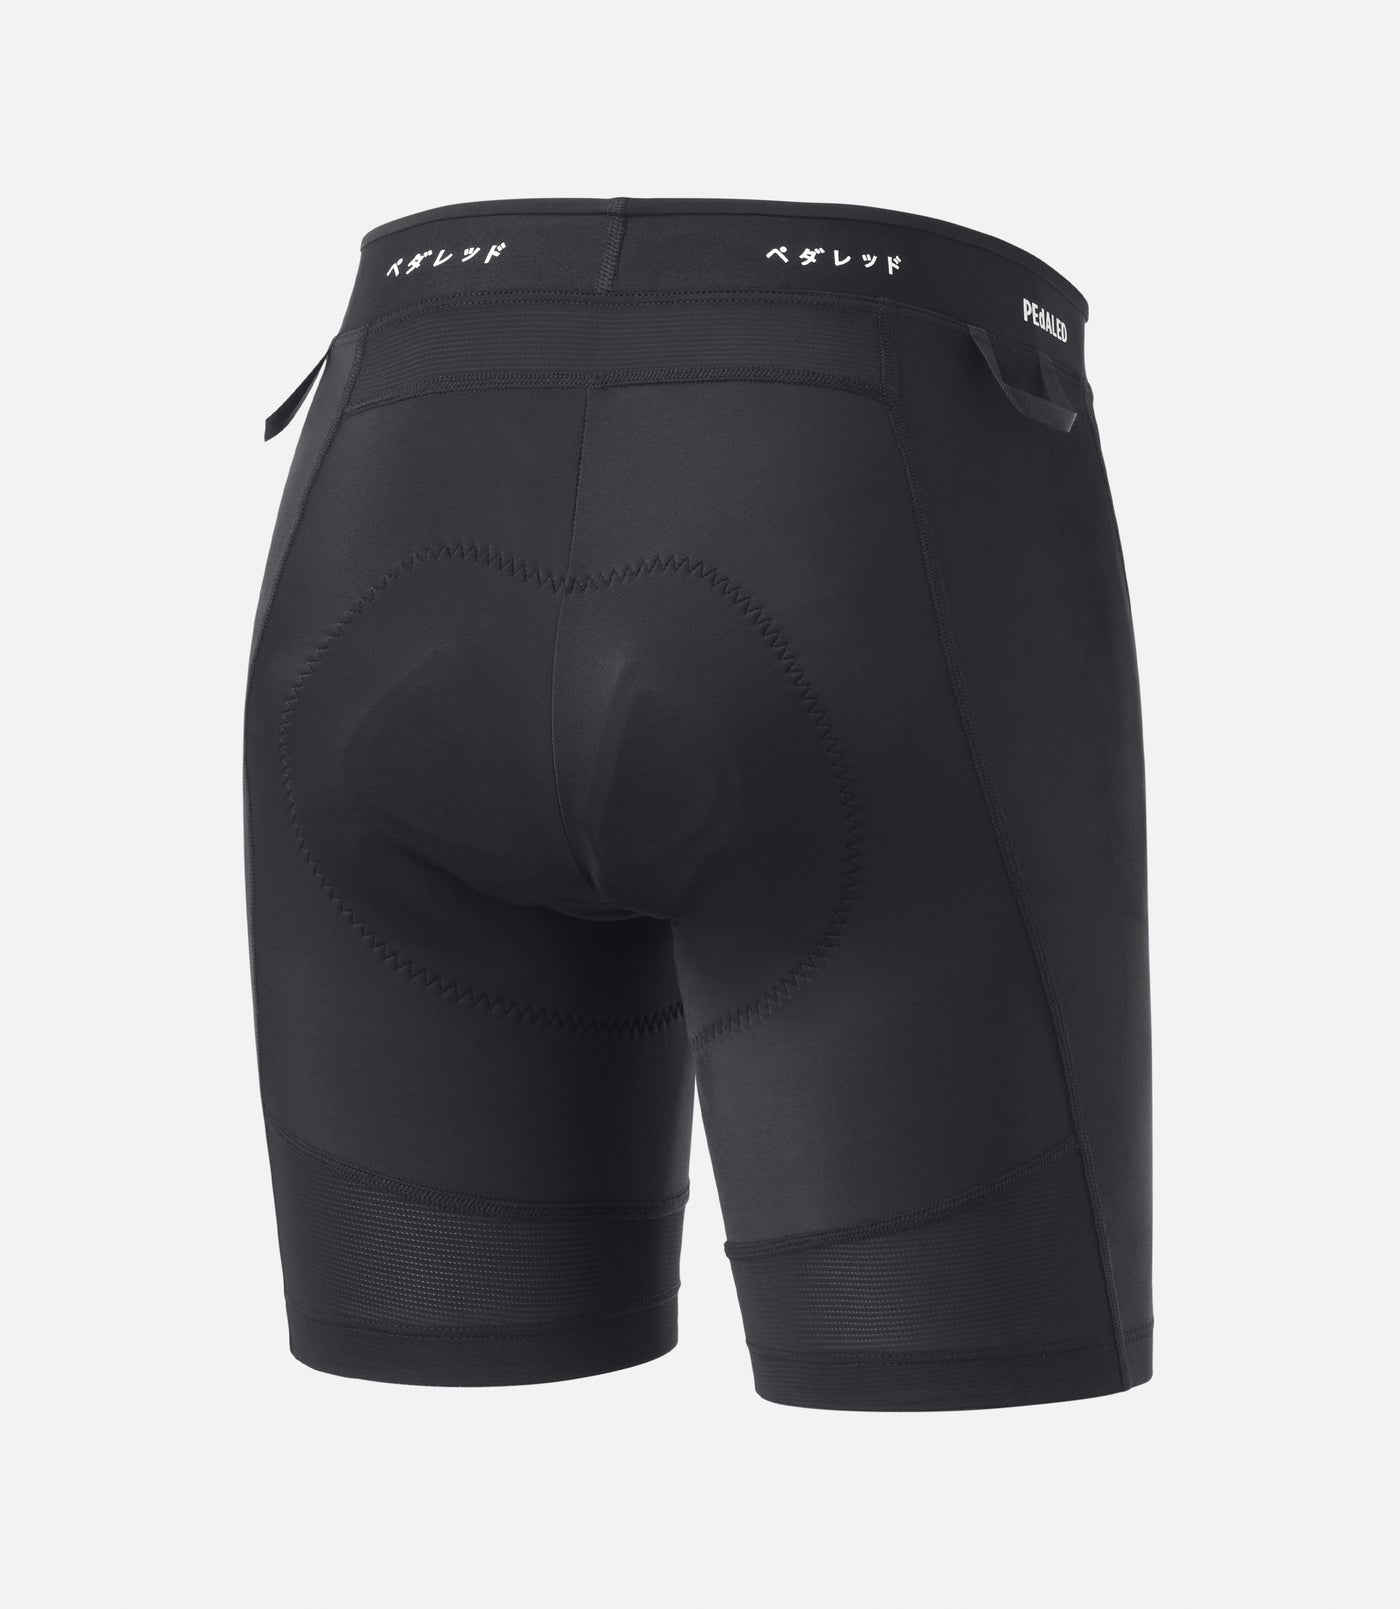 PEdALED Jary Boxer Pad